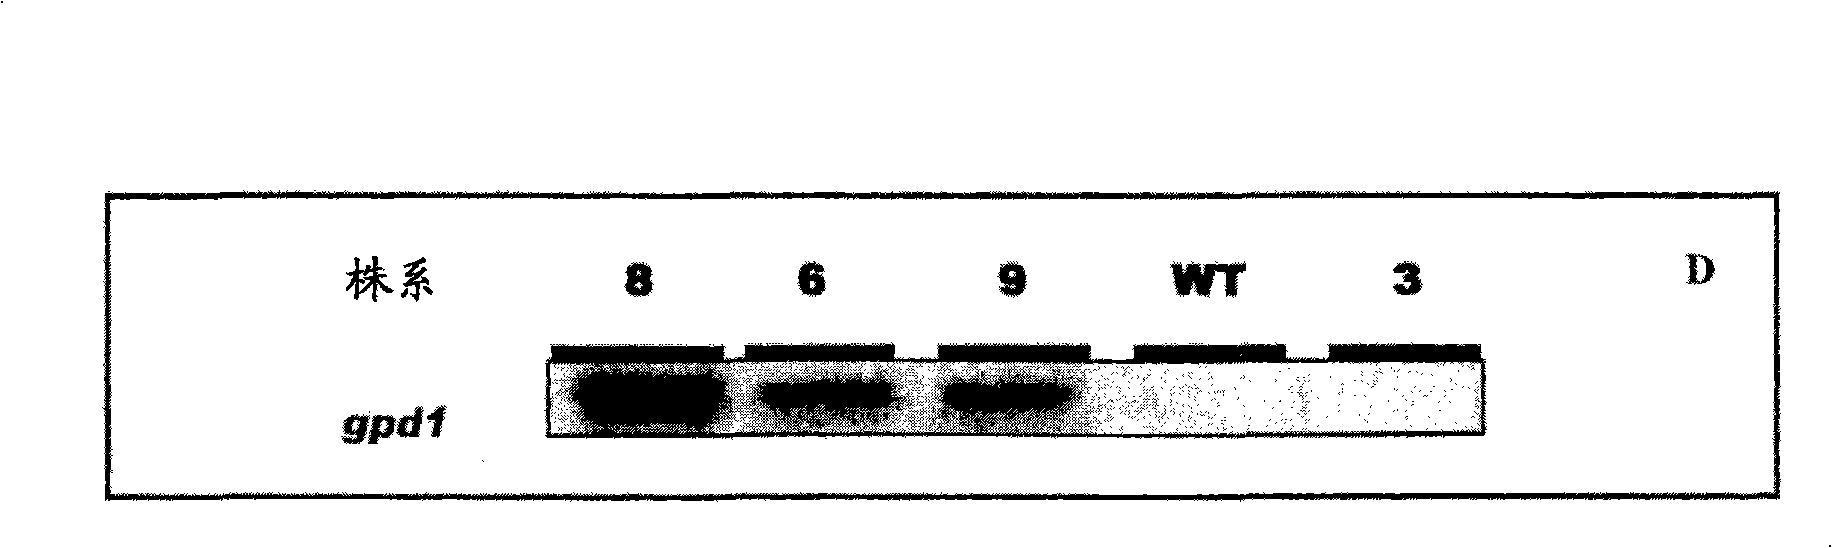 Method for increasing the total oil content in oil plants